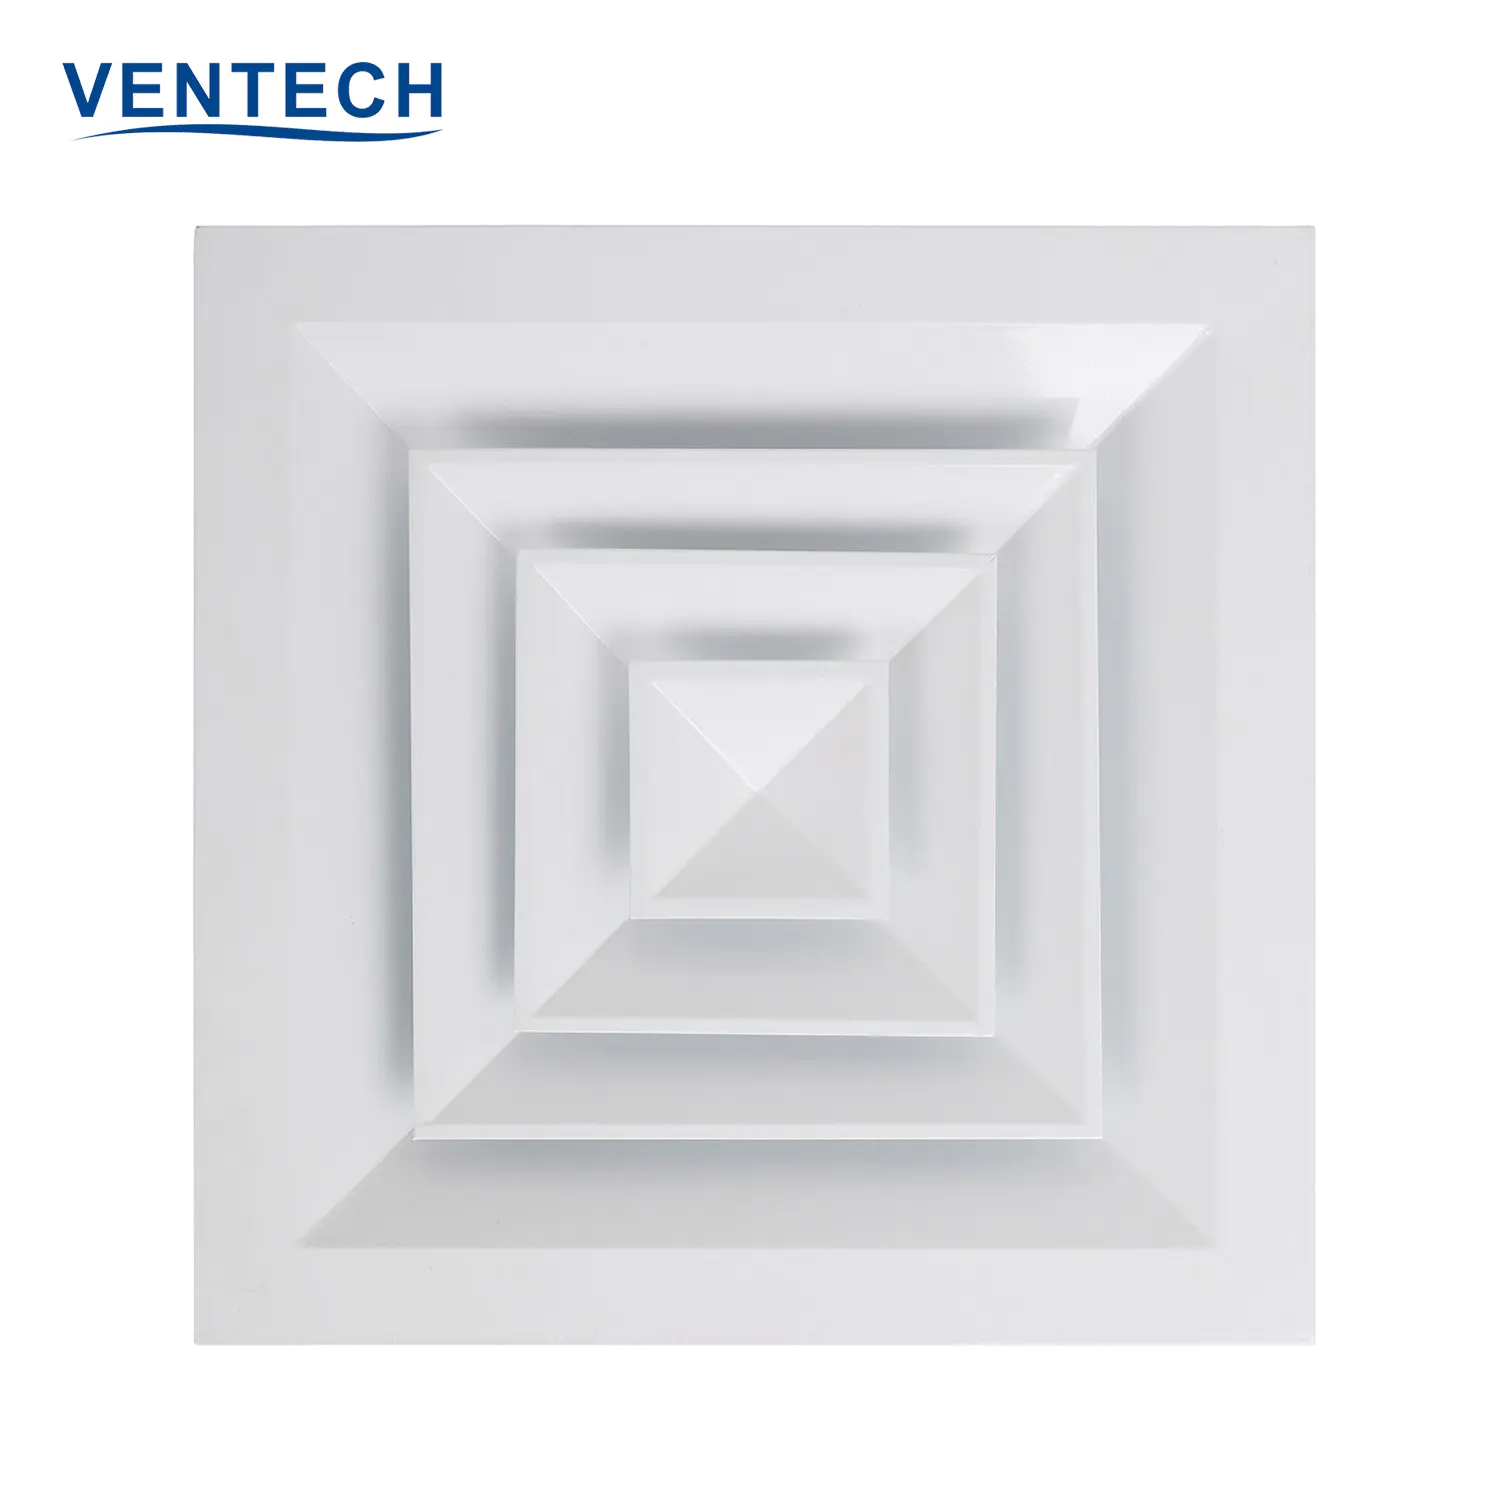 High Quality HVAC VENTECH Exhaust Air Conditioning Duct Aluminum Square Ceiling Diffuser